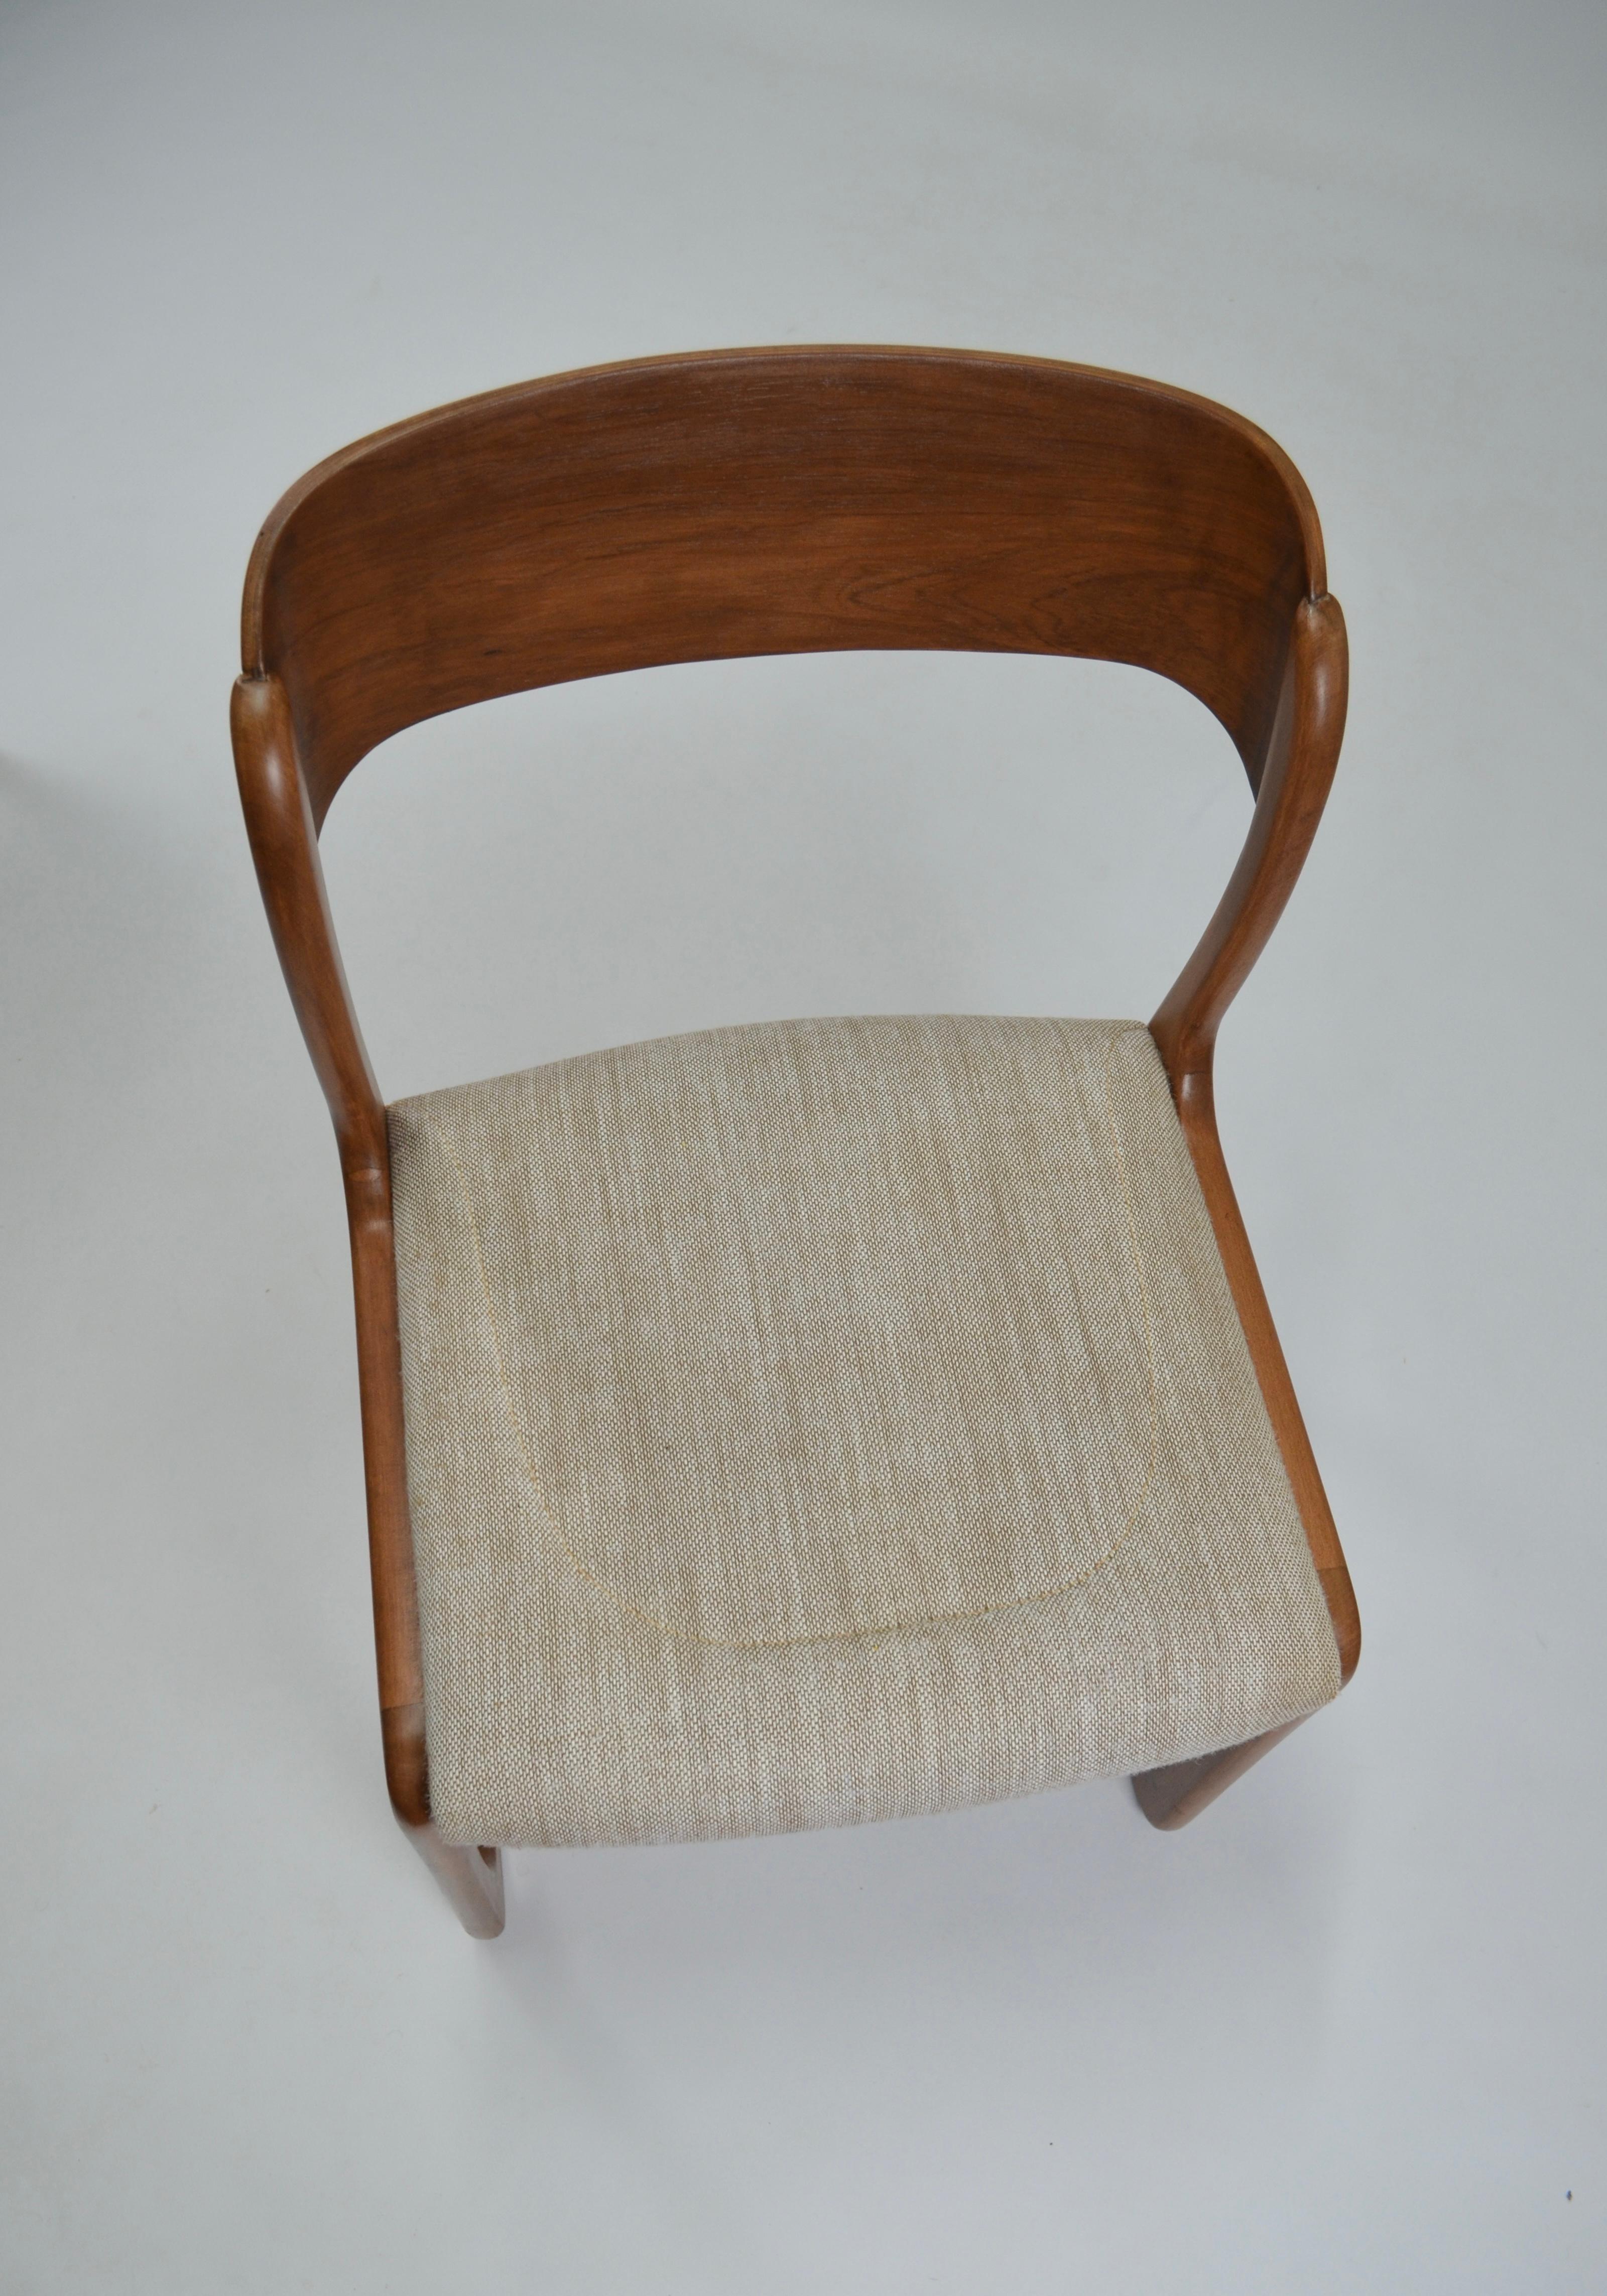 Vintage French Traineau or Sleigh Dining Chairs, Baumann, France, 60s For Sale 6